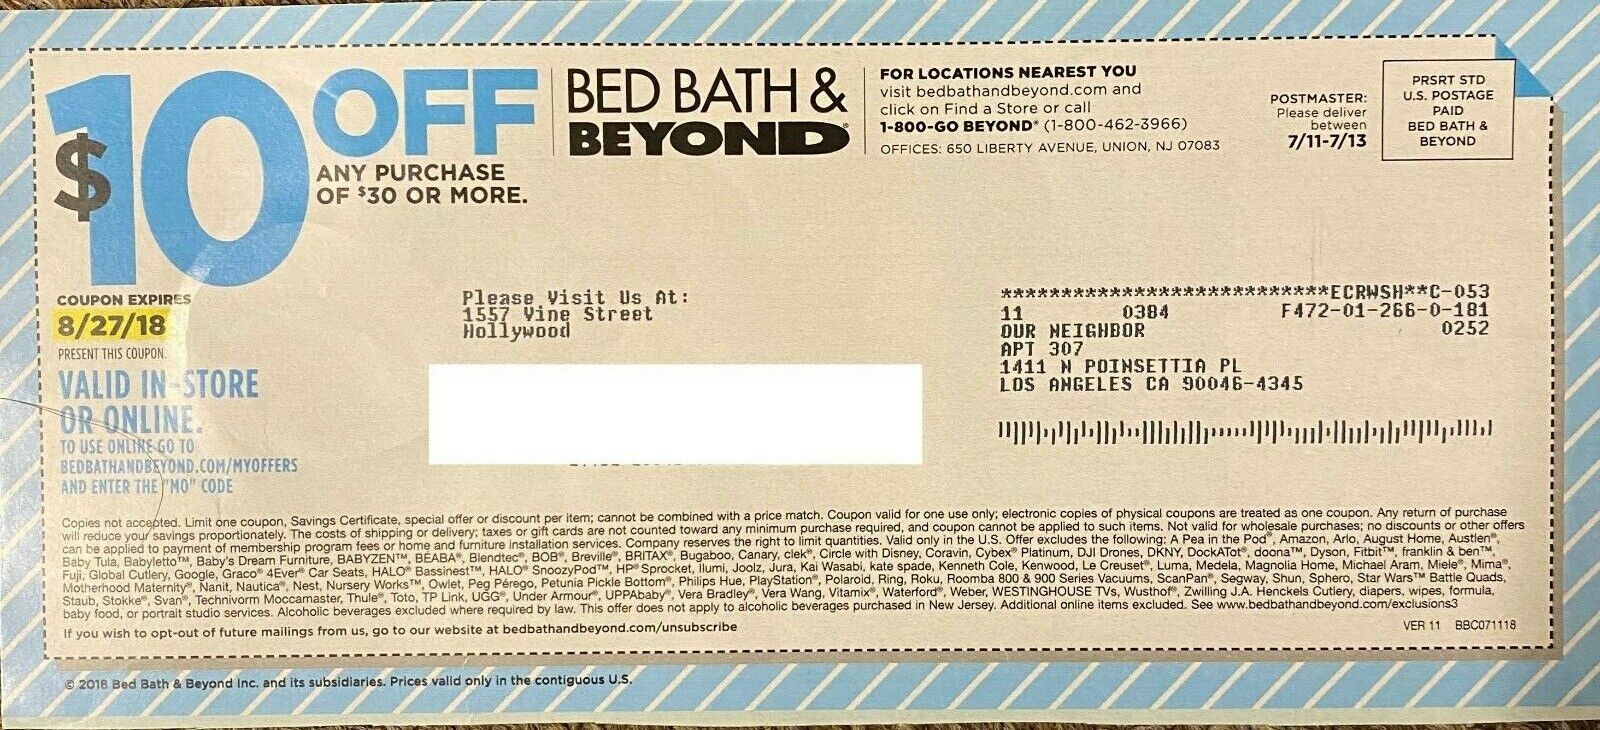 Lot of 10 Bed Bath & Beyond Coupons $10 Off, $5 Off, 20% Off - Never Expire!!!